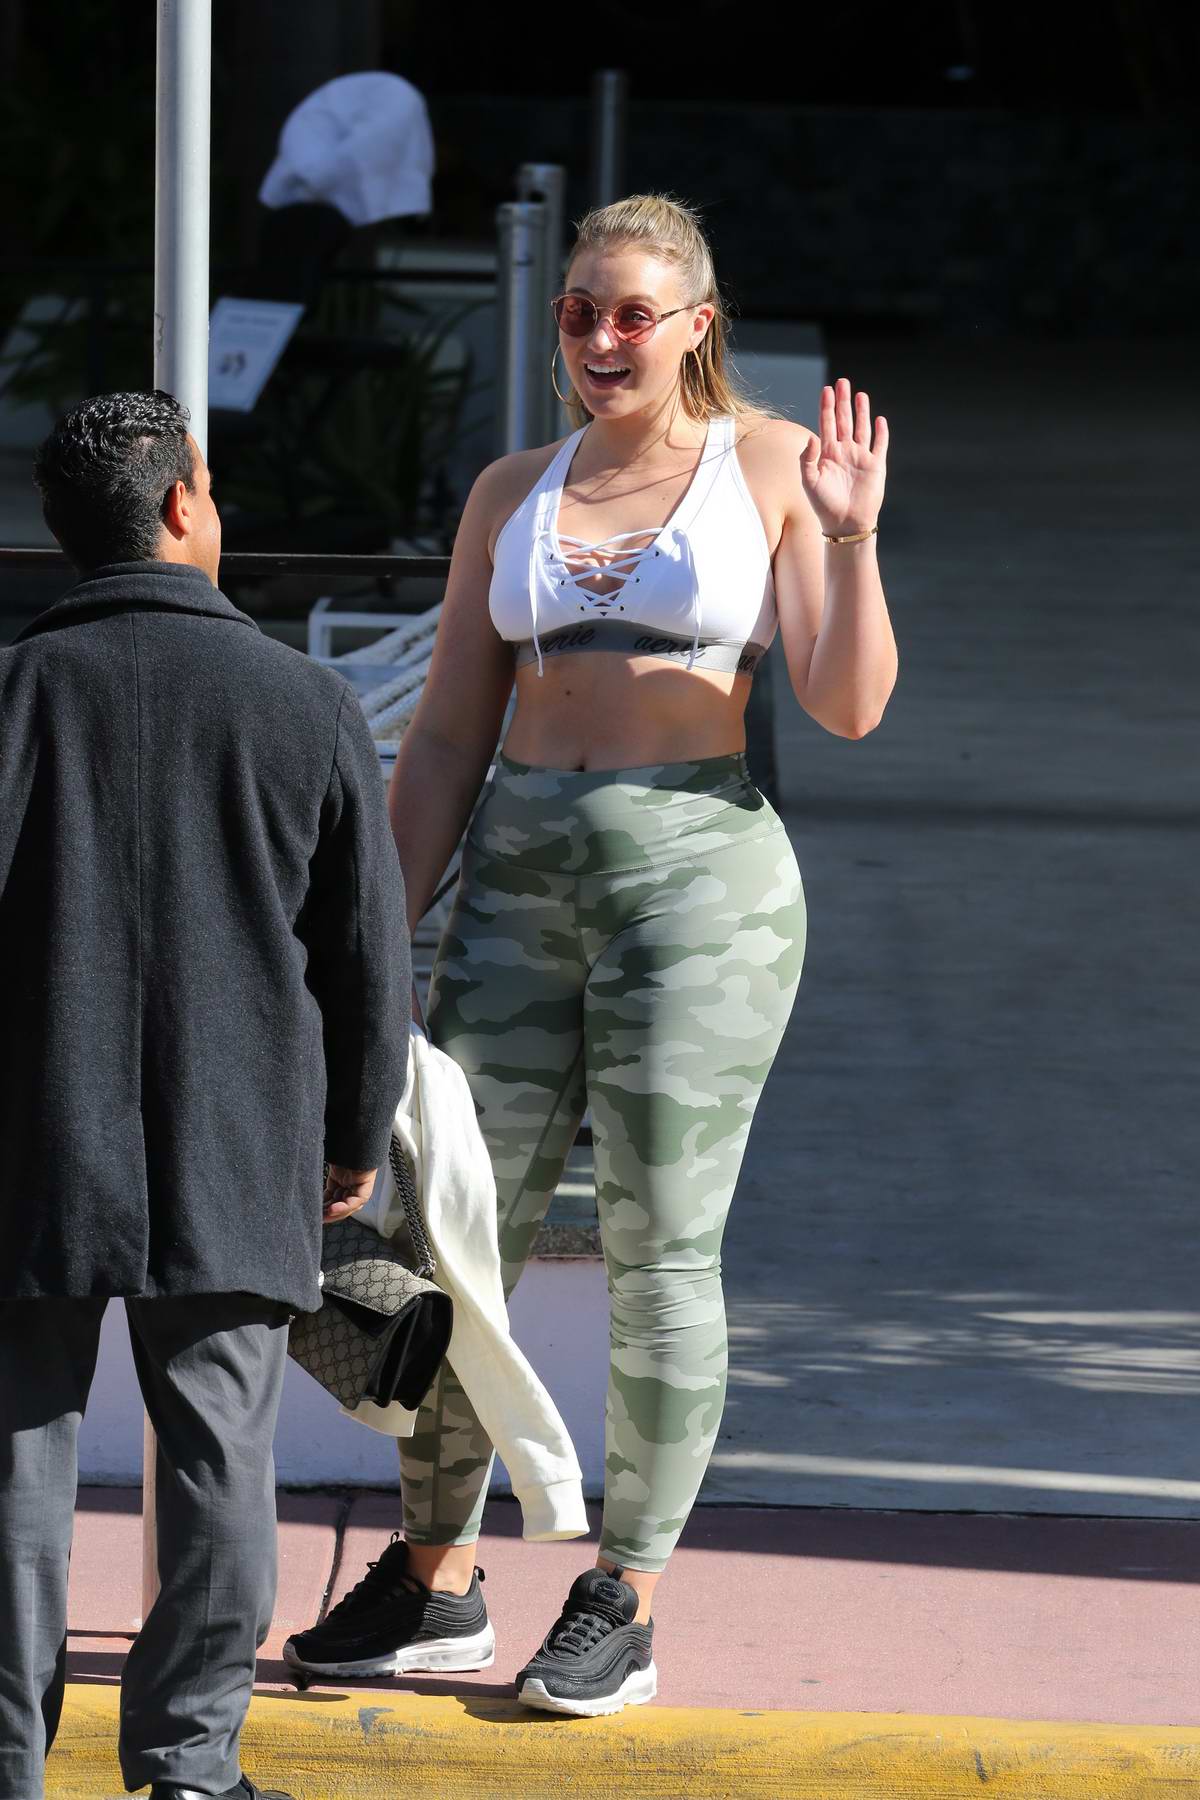 Iskra Lawrence wearing camo yoga pants and a sports bra as she heads out  with friends